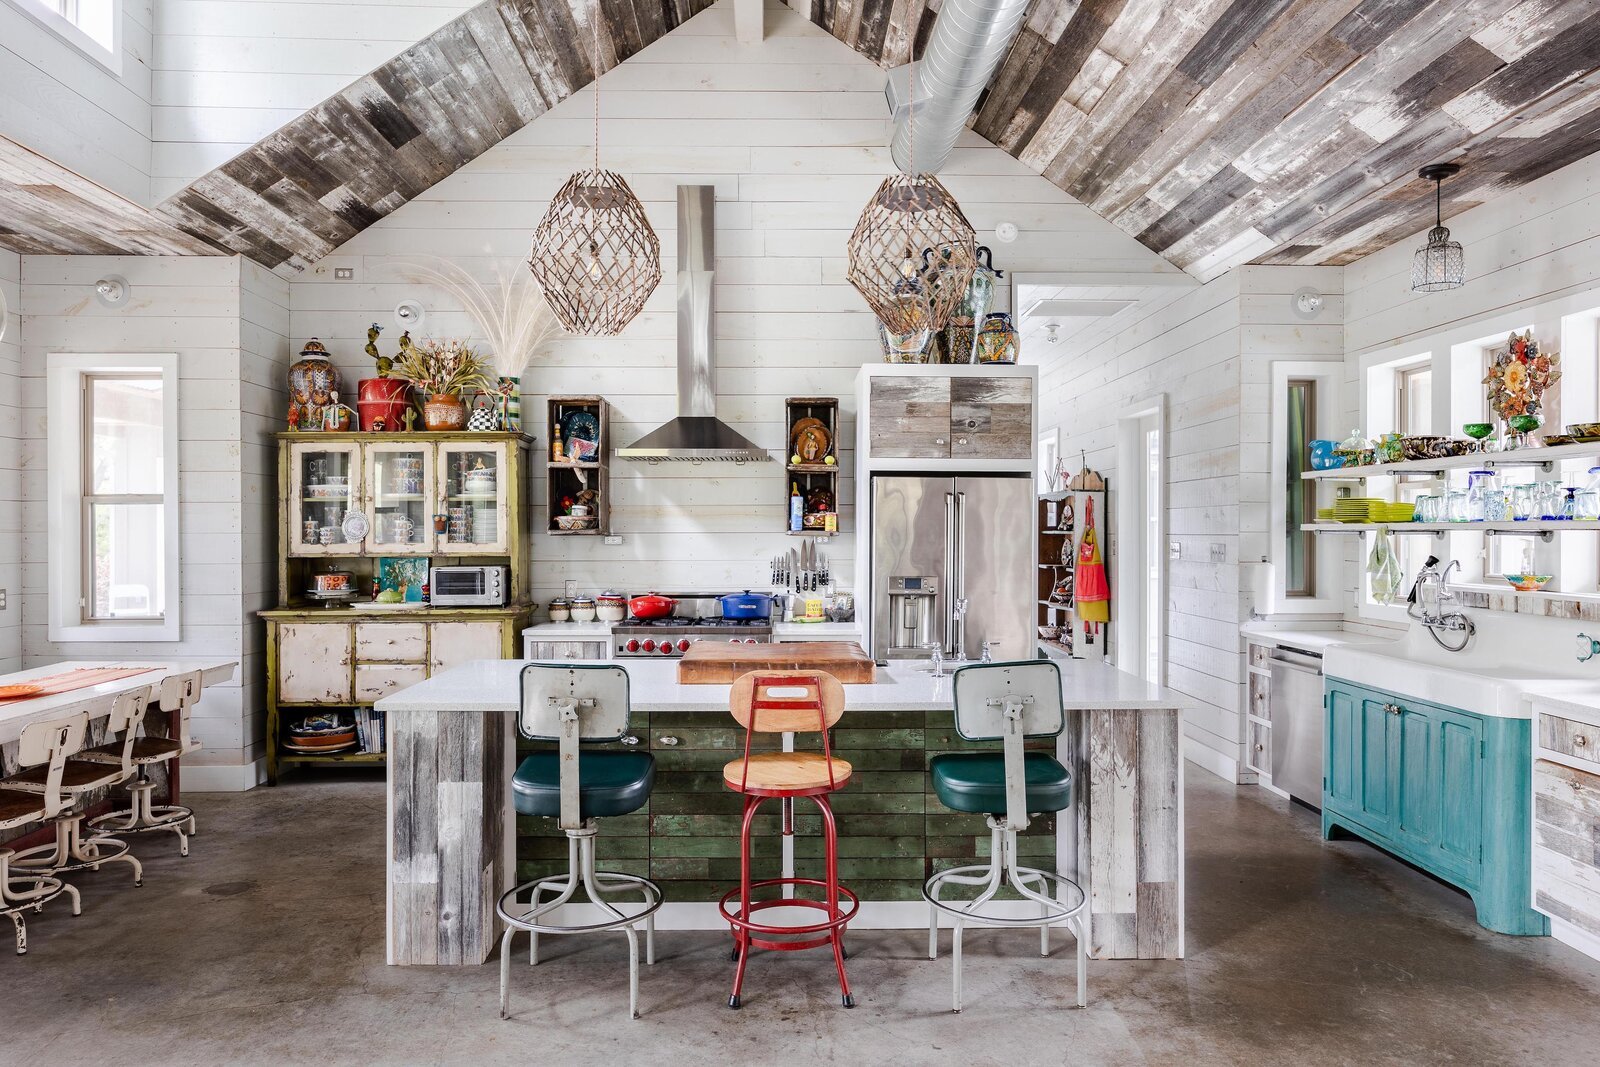 If You Love Antiquing, This $1.7M Texan Farmhouse Is the Ultimate Find